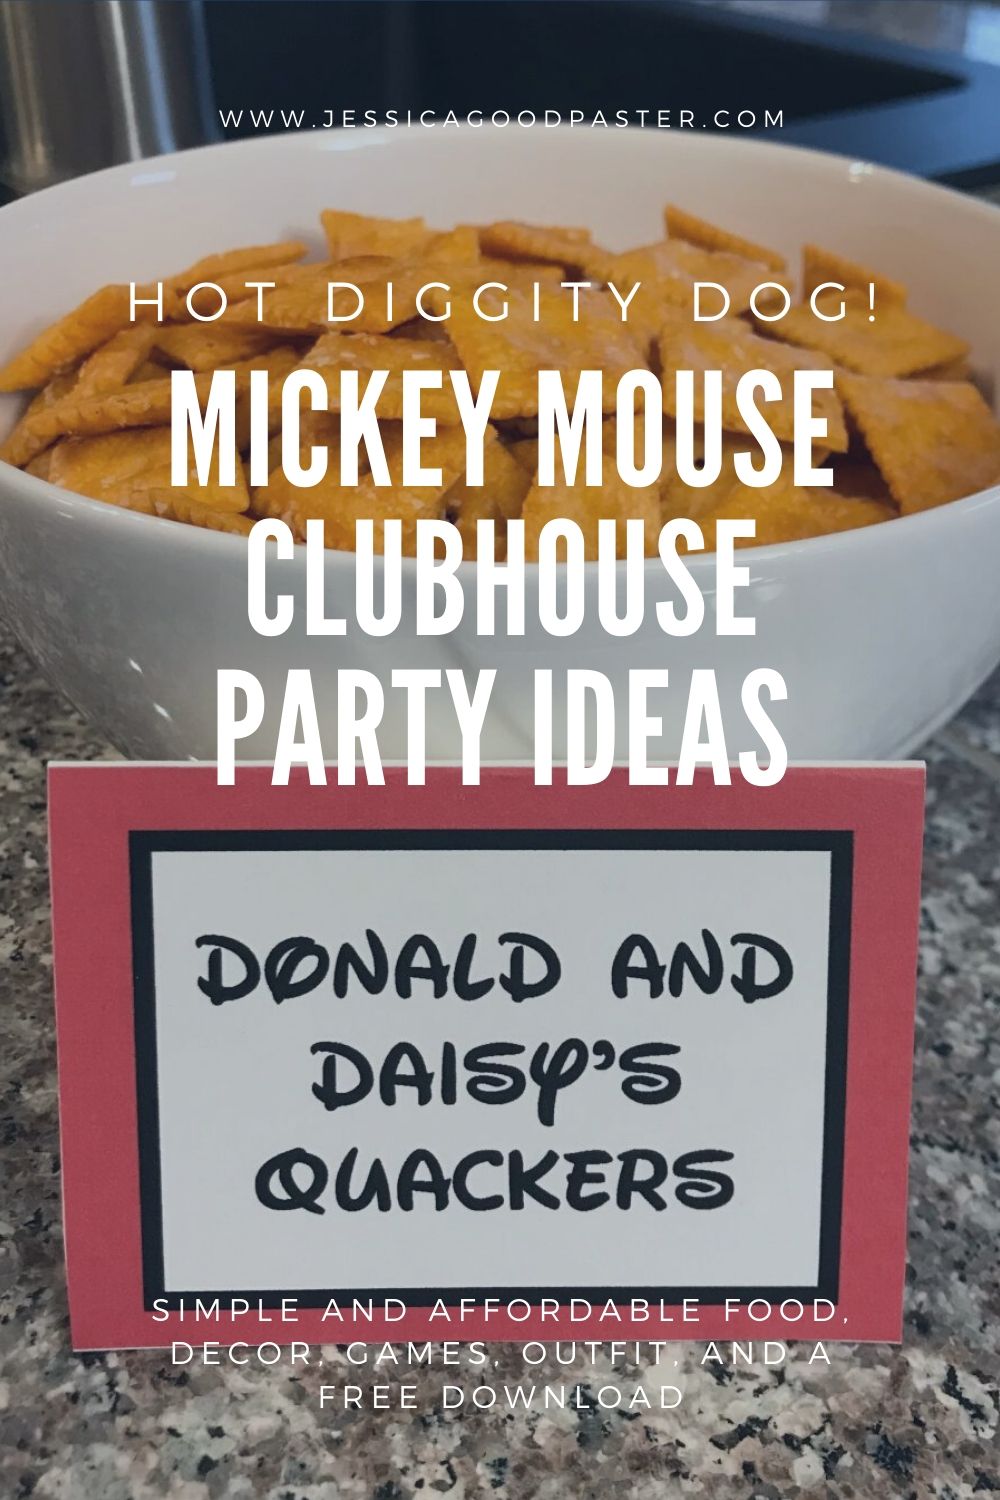 How to Host an Amazing Mickey Mouse Party on a Budget |Donald and Daisy's Quackers | Tons of affordable options for Mickey or Minnie parties including food ideas, decorations, outfits, games, party supplies, and free printables! Your Mickey Mouse Clubhouse fan will have a great birthday ! #mickeyparty #mickeymouse #mickeymouseparty #minnieparty #birthday #mickeymouseclubhouse #mickeyprintables